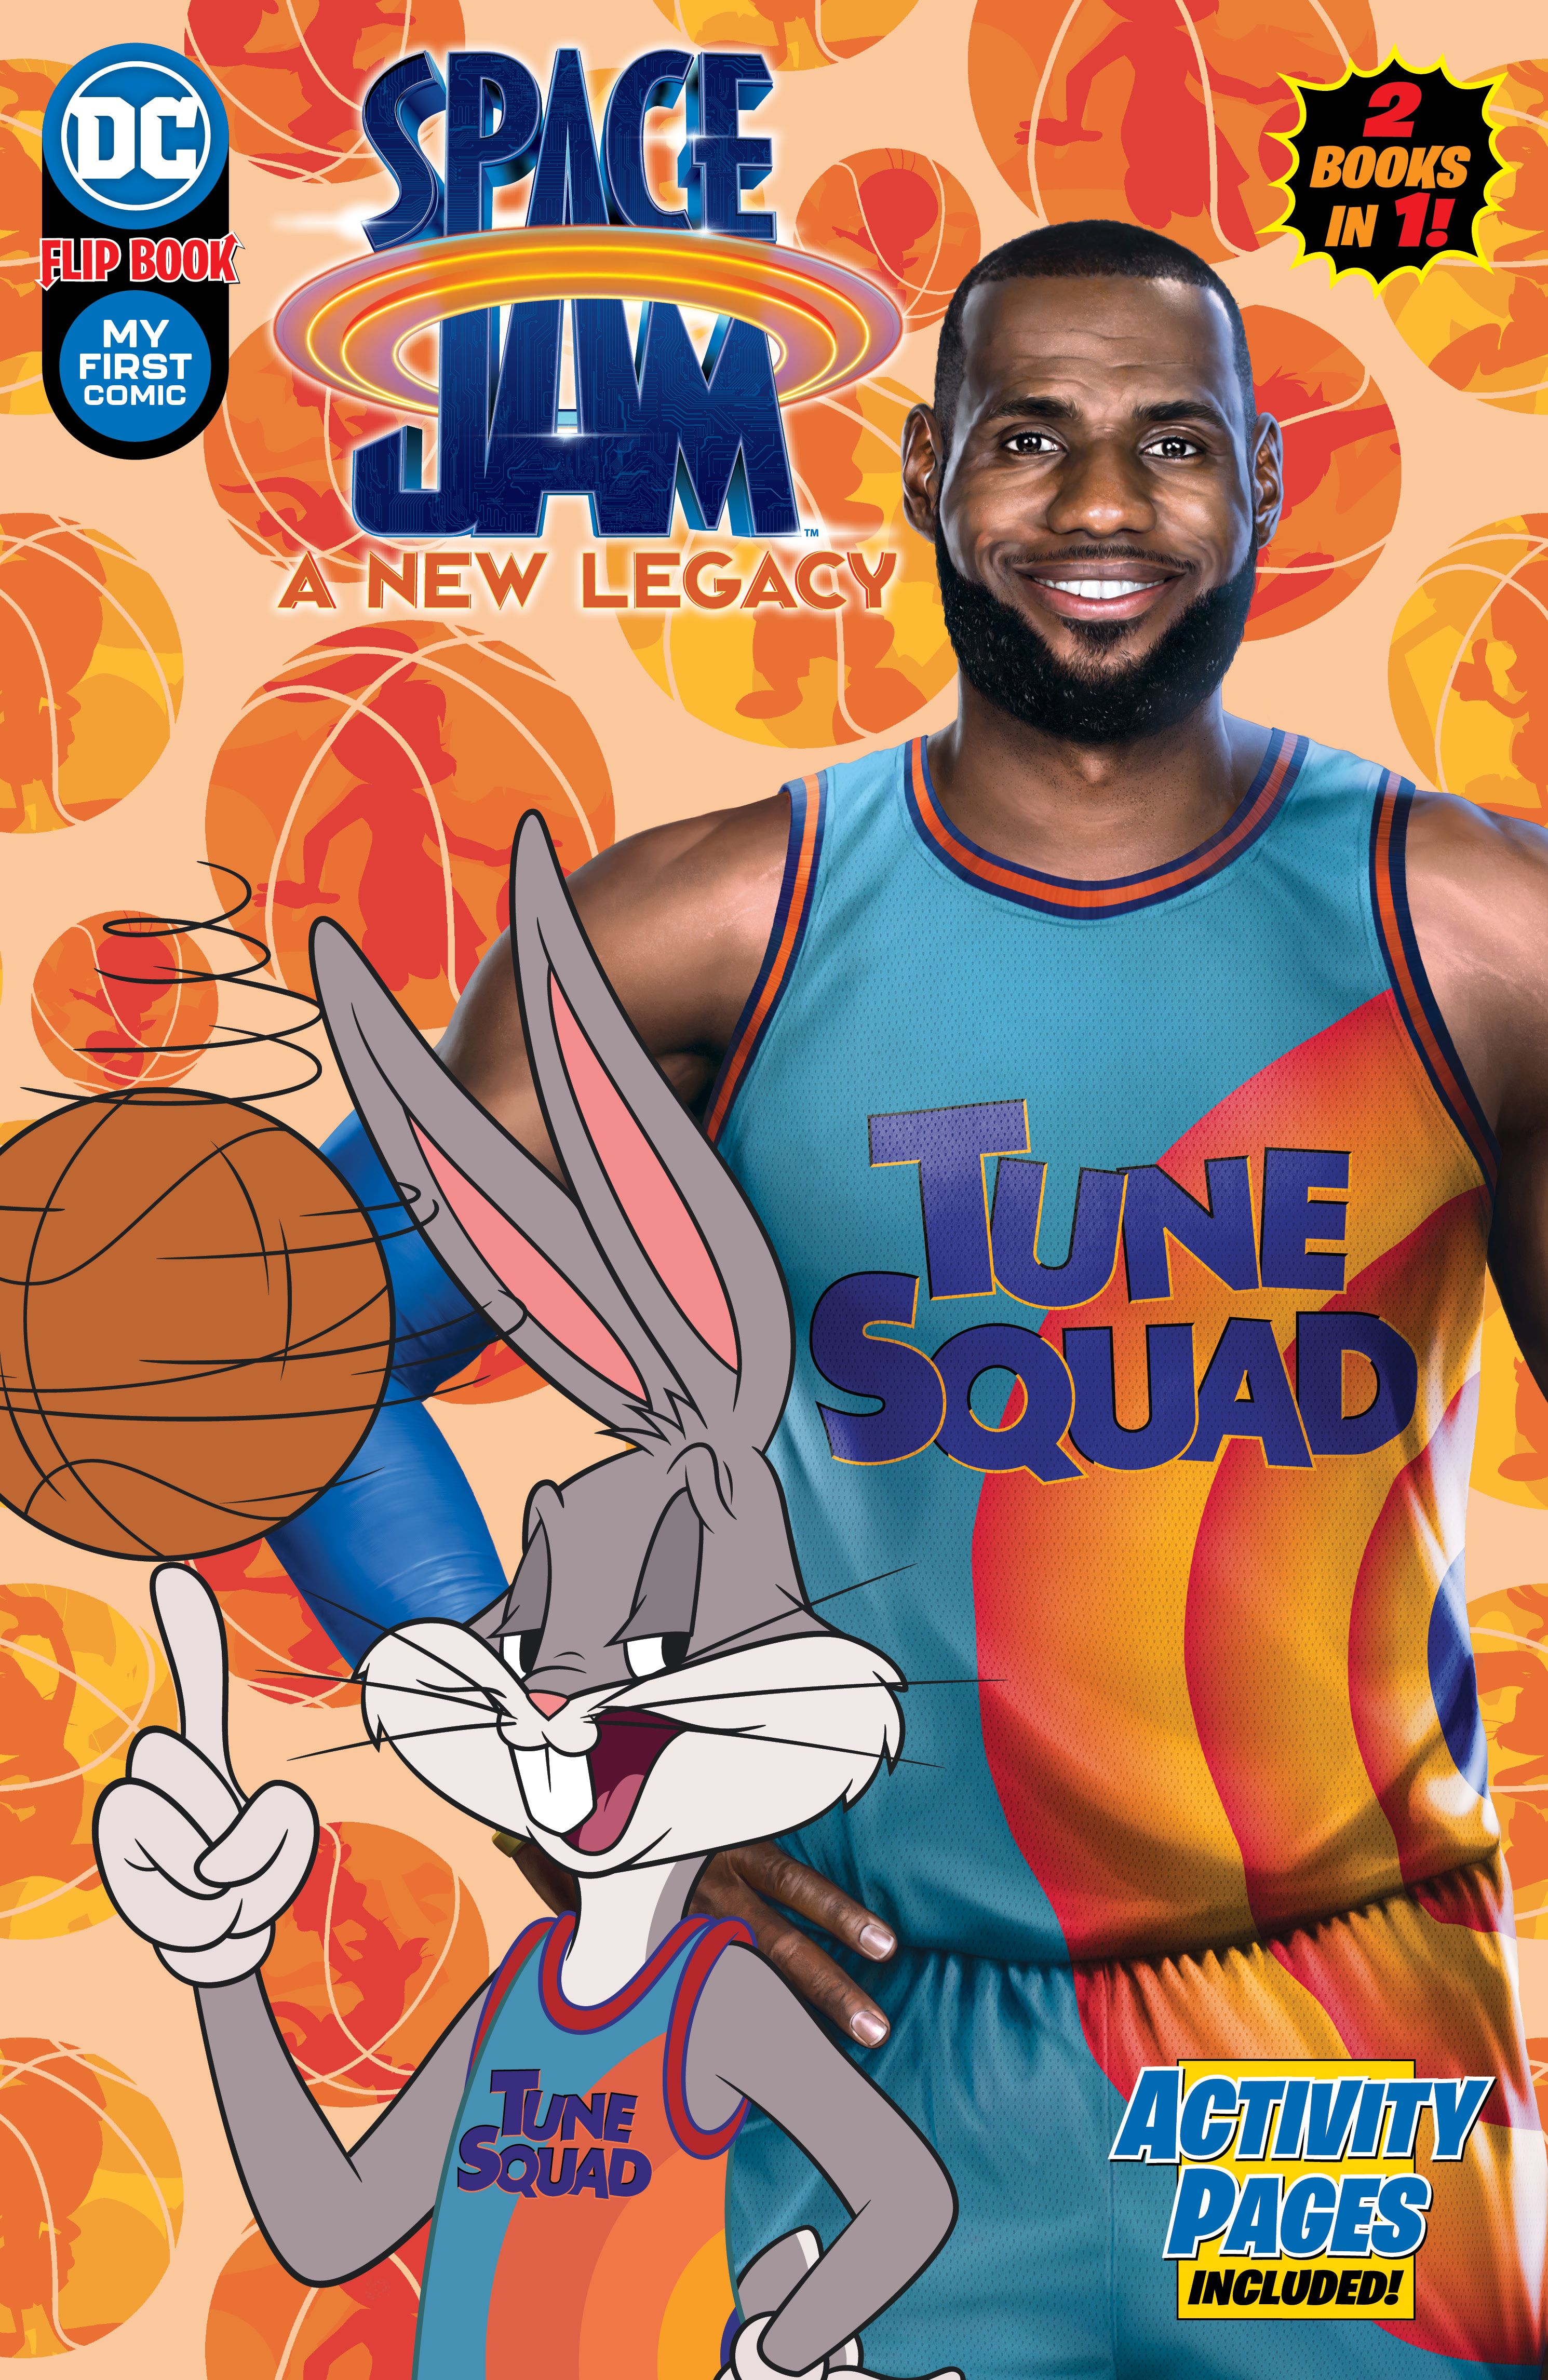 The cover for the Space Jam My First Comic flipbook